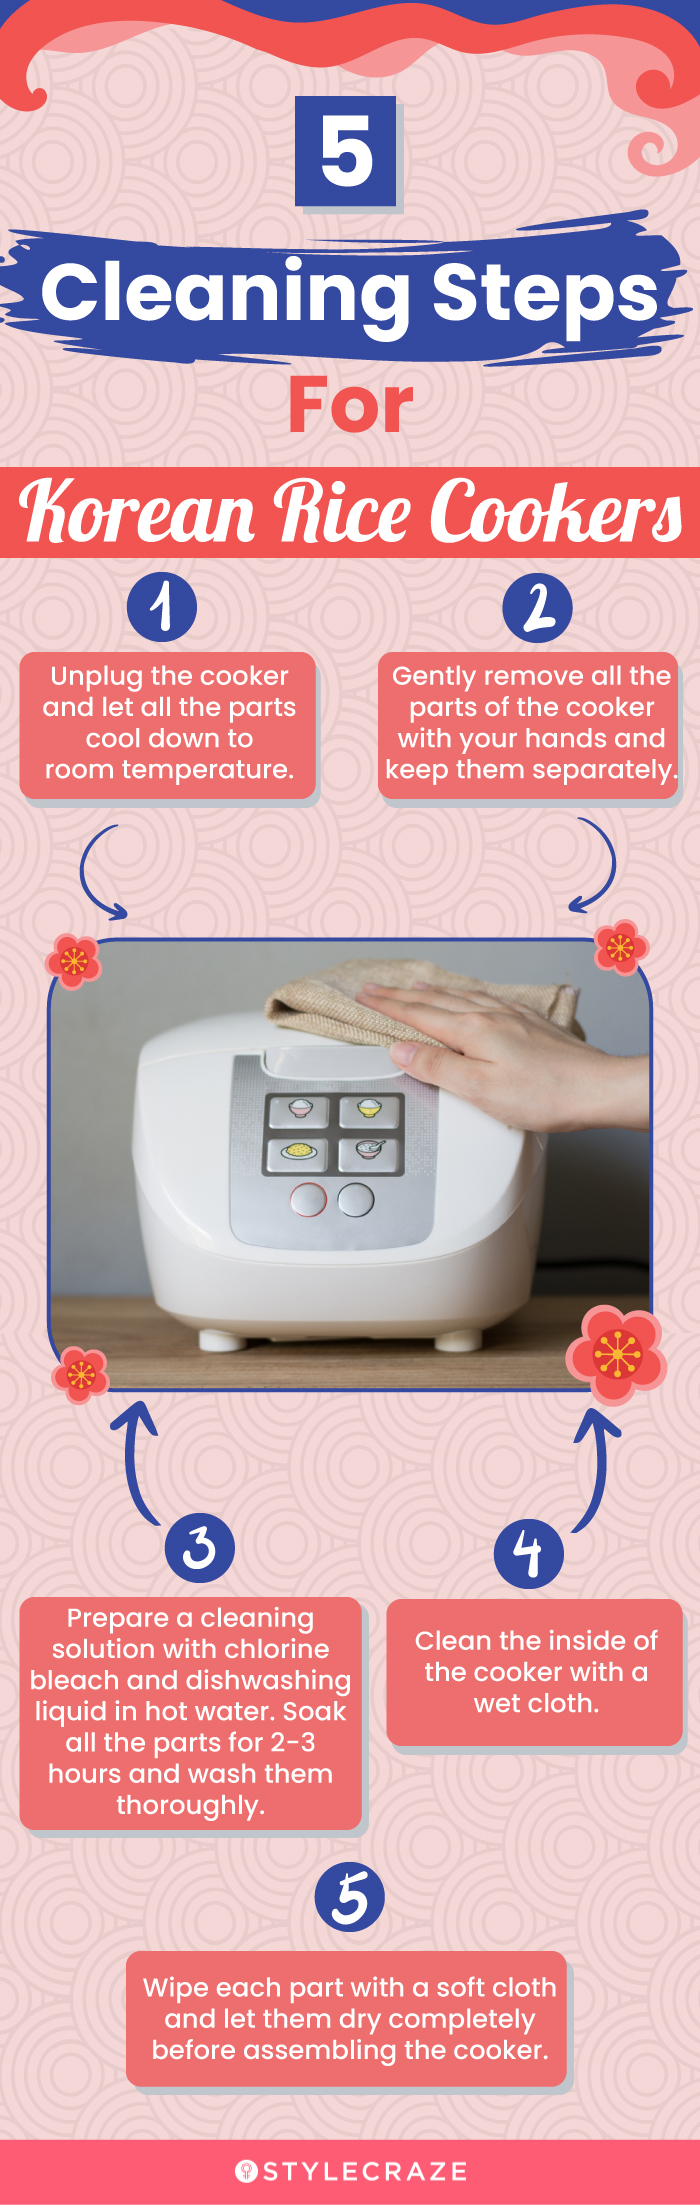 5 Cleaning Steps For Korean Rice Cookers (infographic)